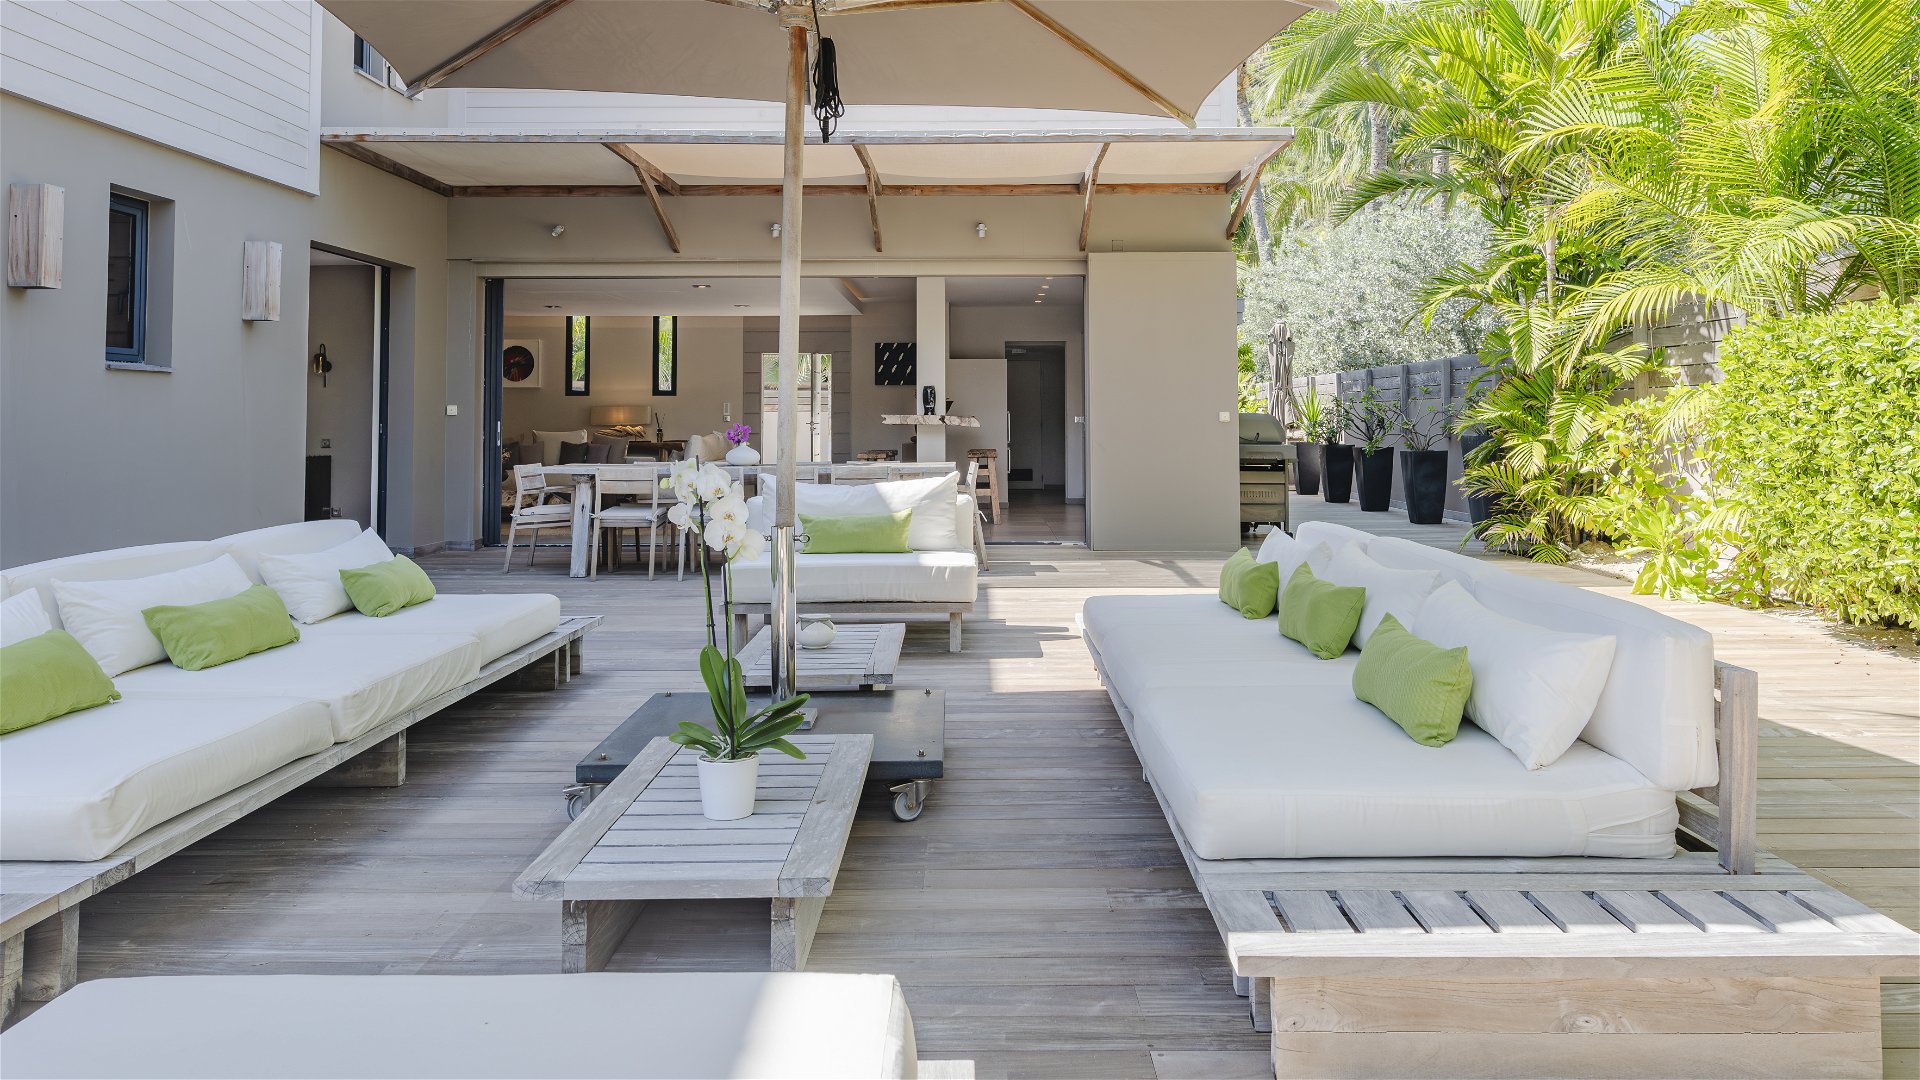 OUTDOOR LOUNGE AREA